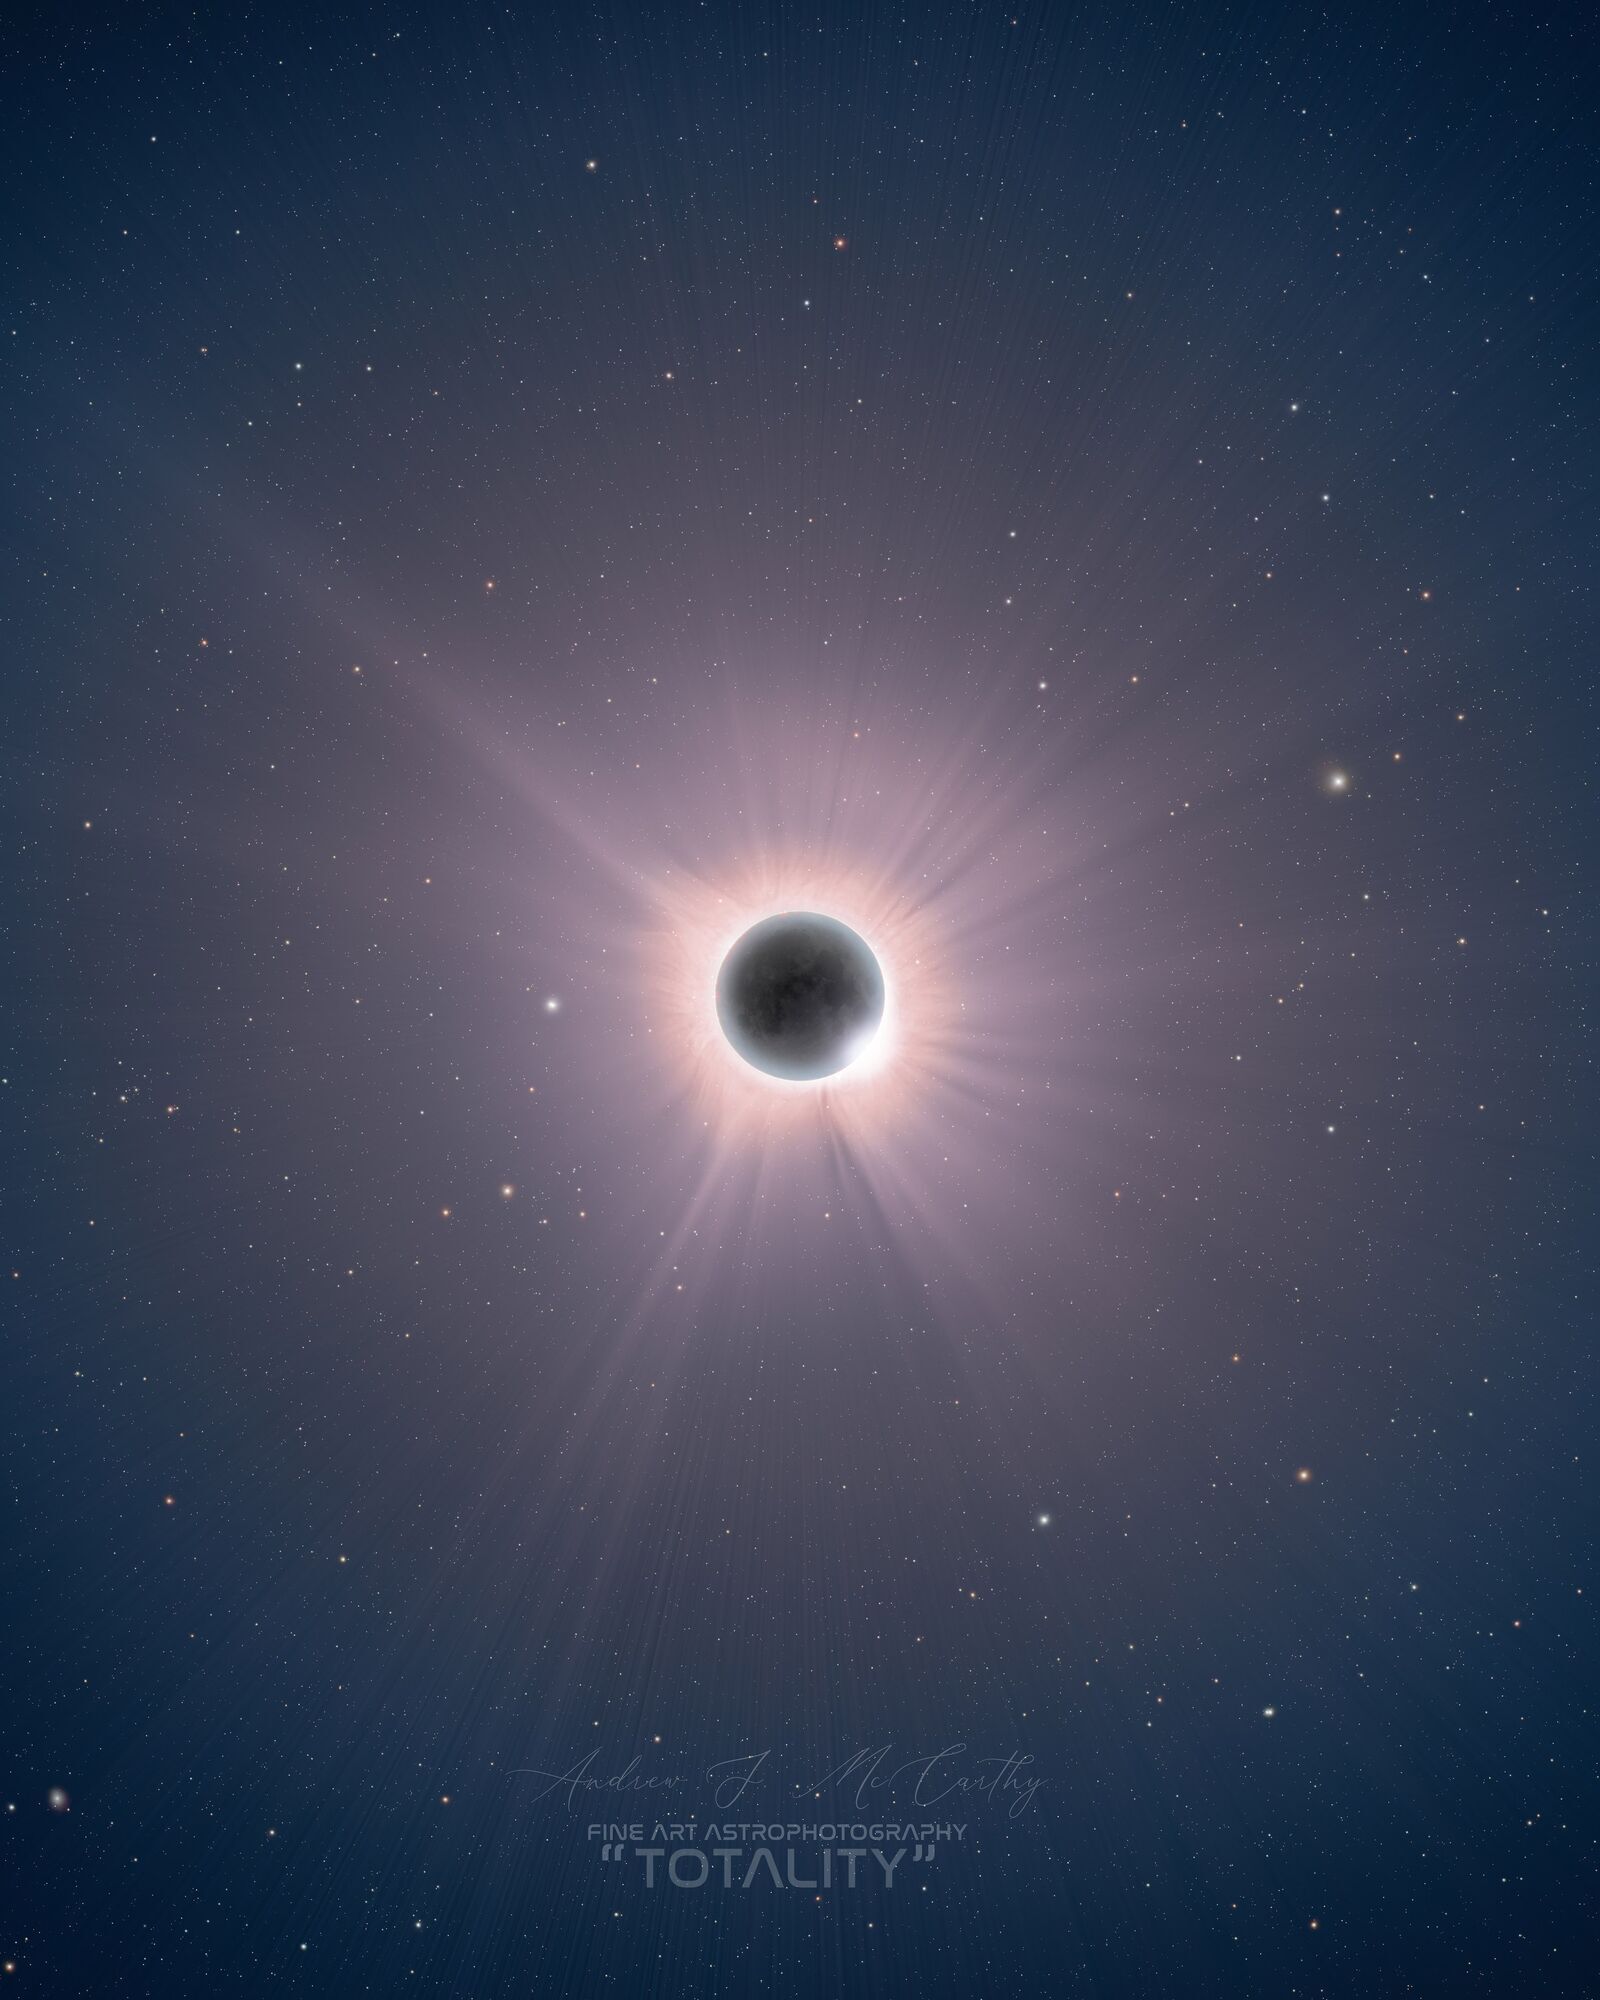 Is it definitely not AI? Astrophotographer shows a photo of a solar eclipse that's hard to believe